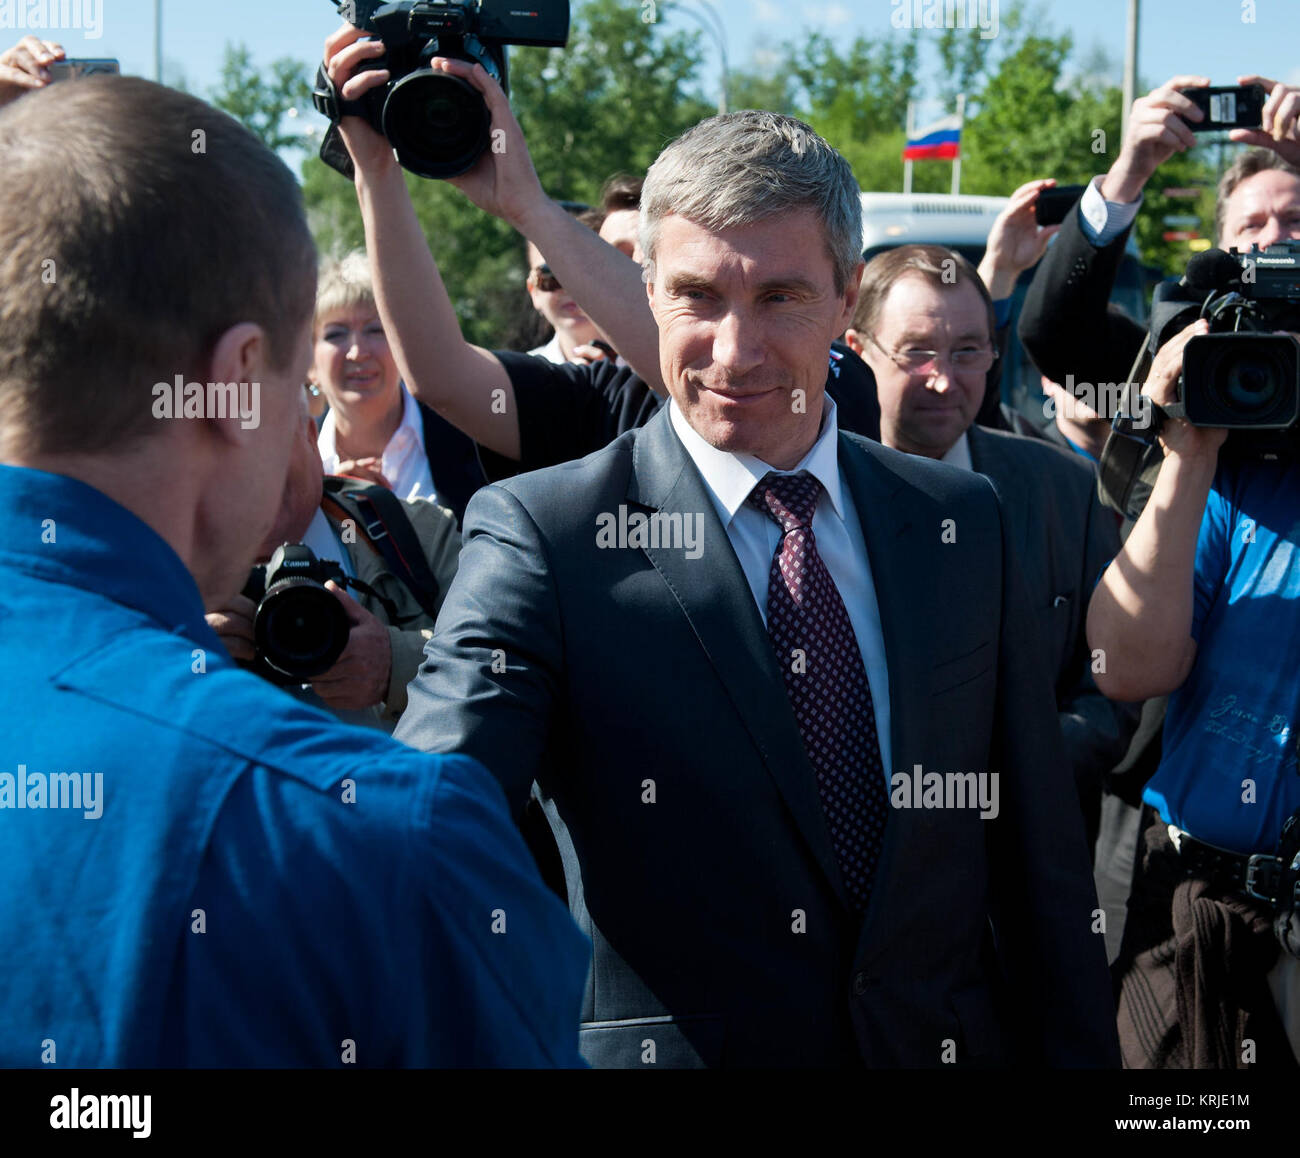 Chief, Gagarin Cosmonaut Training Center, Sergei Krikalev shakes hands and welcomes home Expedition 27 Commander Dmitry Kondratyev at the Chkalovsky airport outside Star City, Russia several hours after Kondratyev and Flight Engineers Paolo Nespoli and Cady Coleman landed in their Soyuz TMA-20 southeast of the town of Zhezkazgan, Kazakhstan, on Tuesday, May 24, 2011.  NASA Astronaut Coleman, Russian Cosmonaut Kondratyev and Italian Astronaut Nespoli are returning from more than five months onboard the International Space Station where they served as members of the Expedition 26 and 27 crews. P Stock Photo